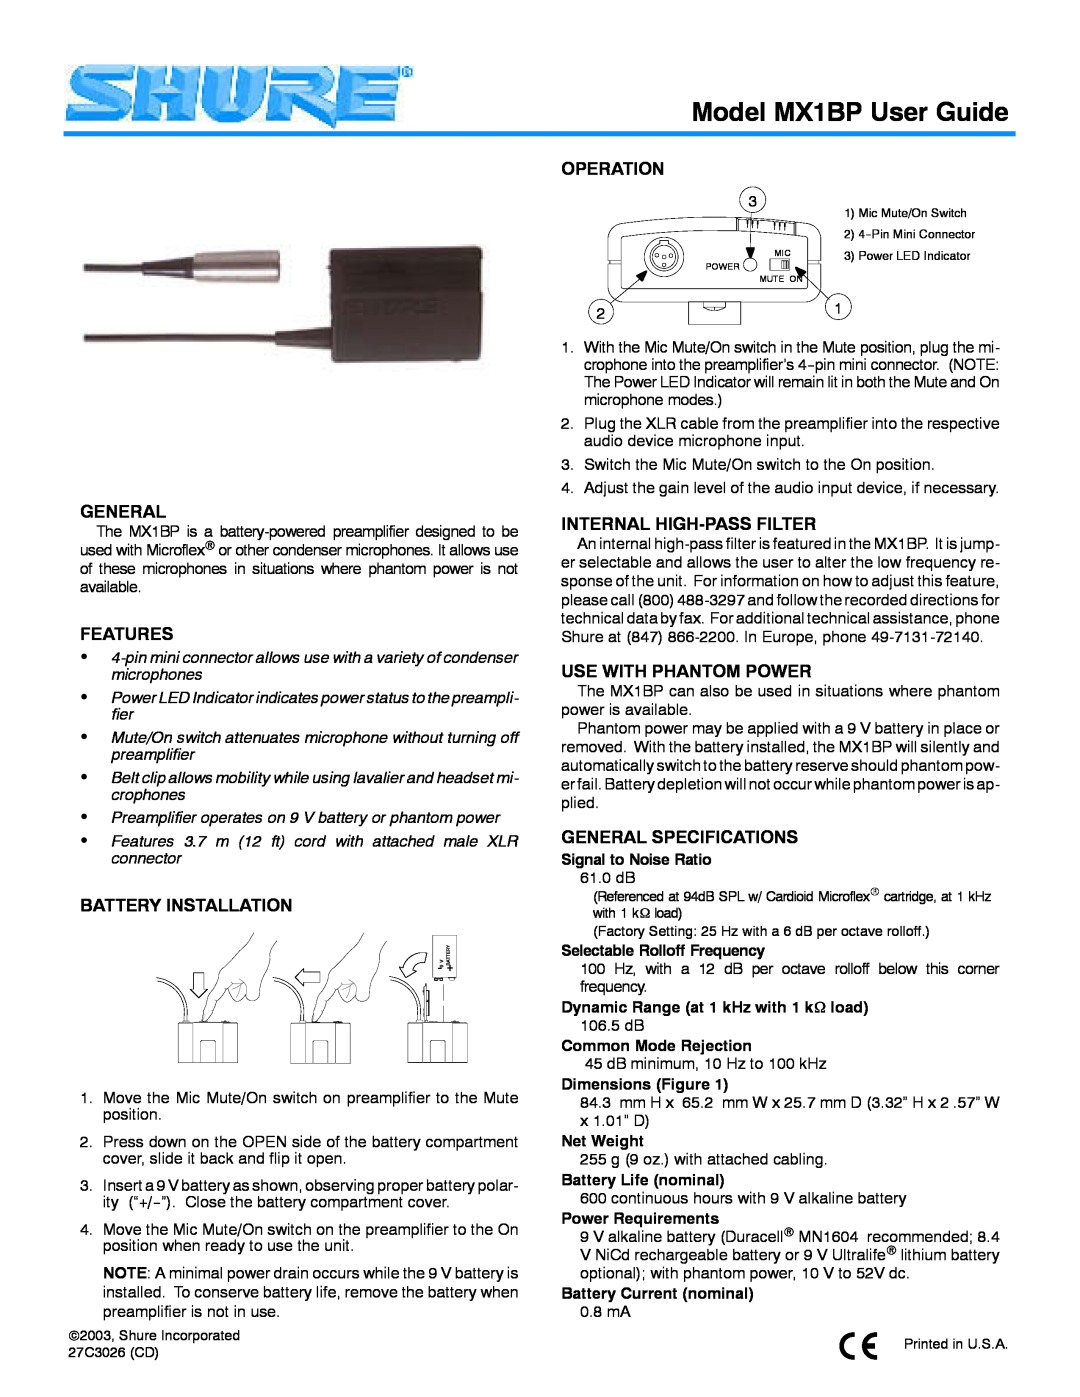 Shure MX1BP specifications Operation, General, Features, Battery Installation, Internal High-Passfilter, Dimensions Figure 